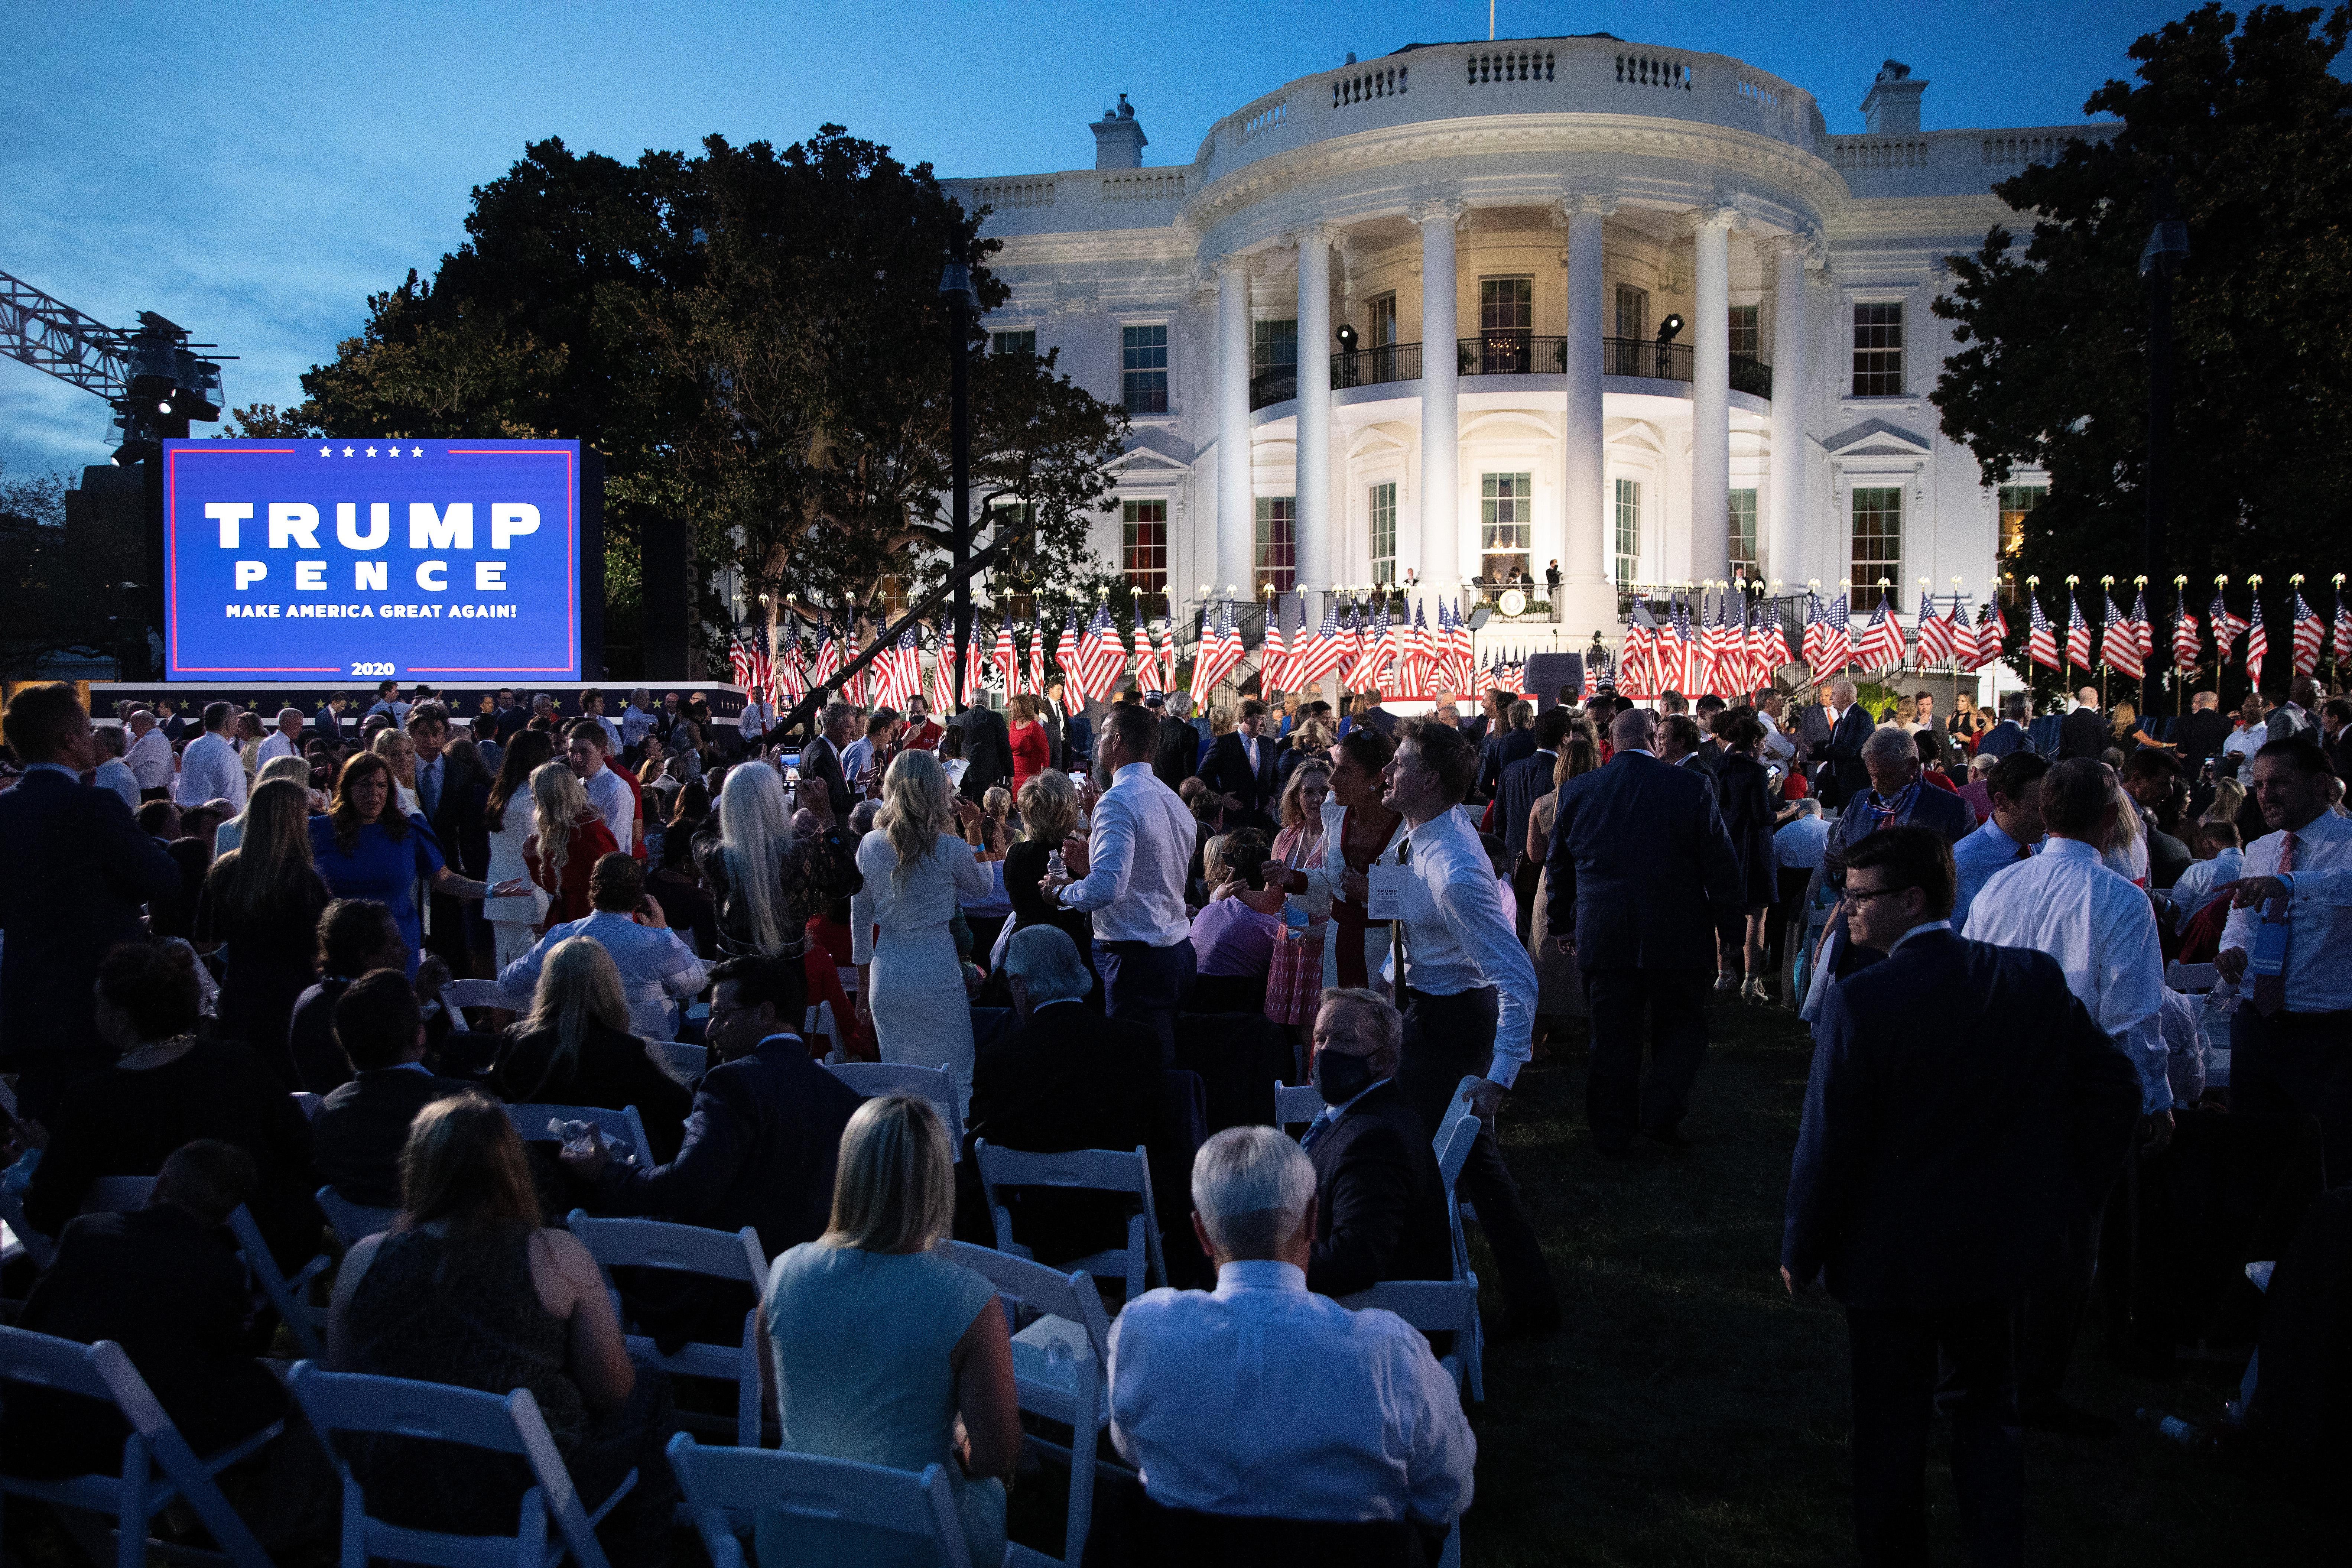 The south lawn of the White House, filled with people overshadowed by a giant Trump Pence sign.